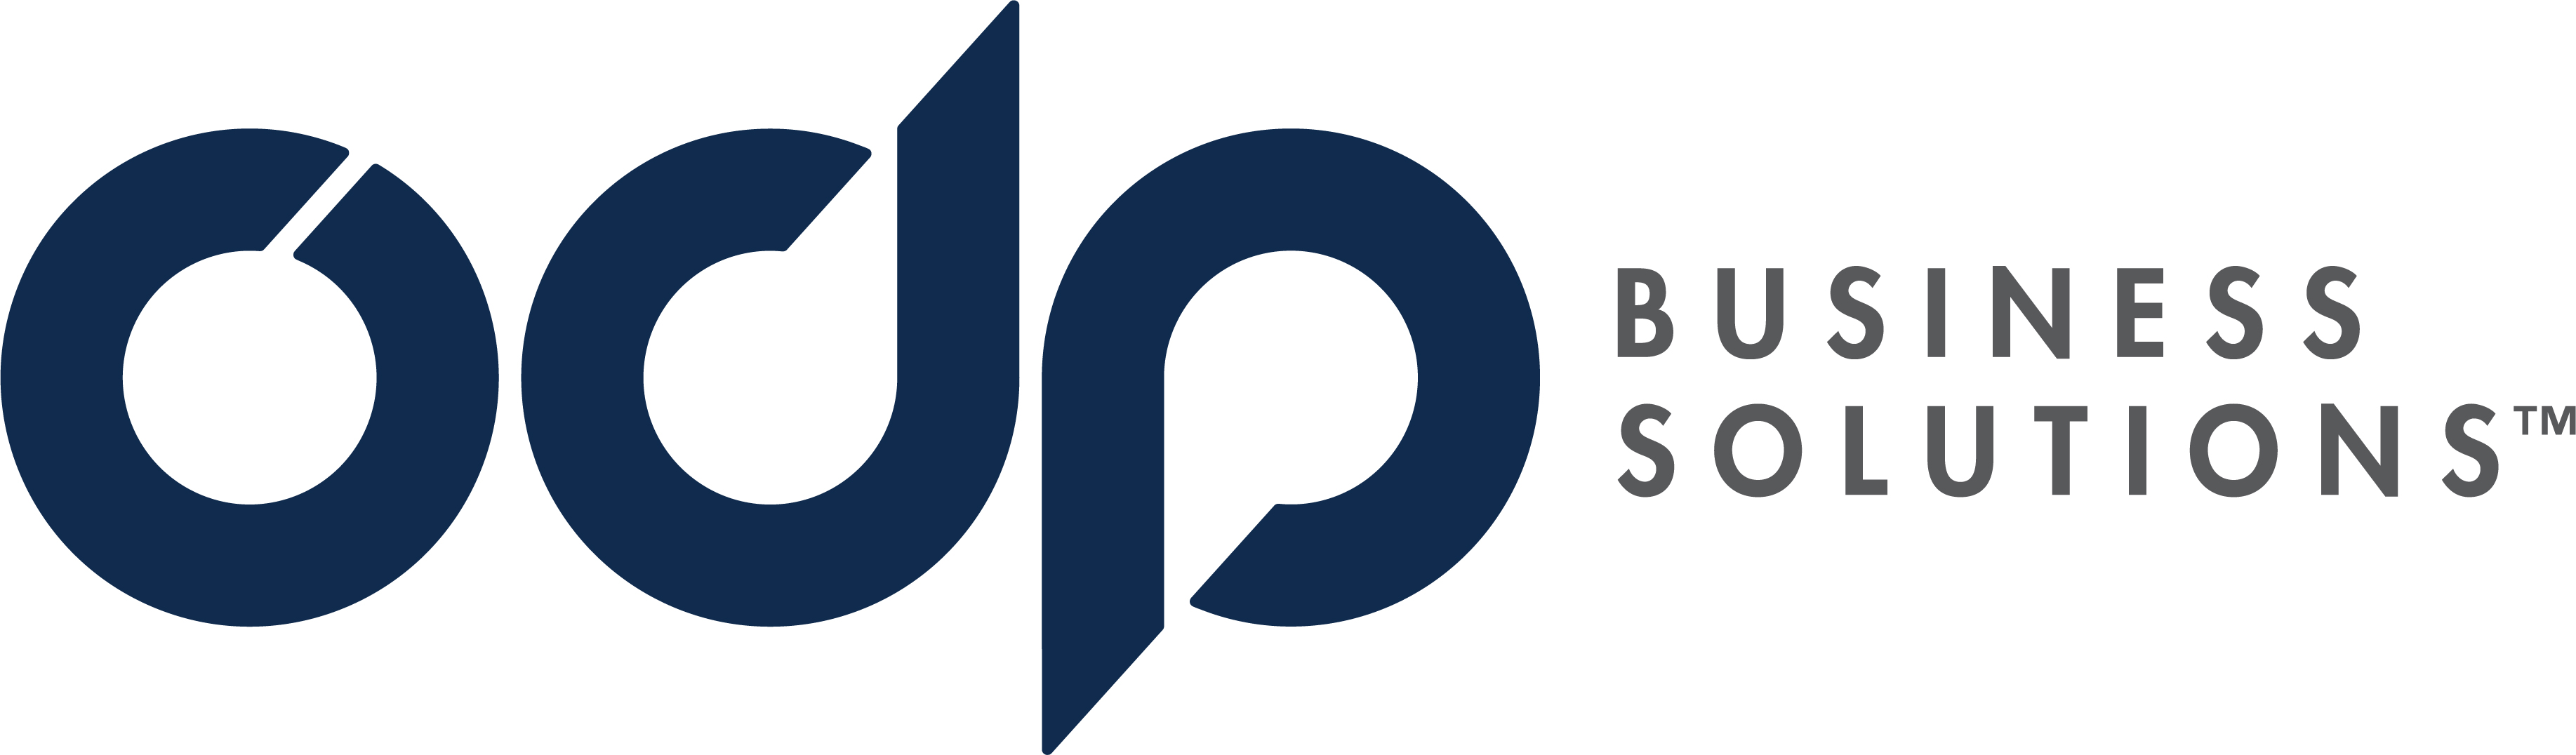 odp business solutions logo